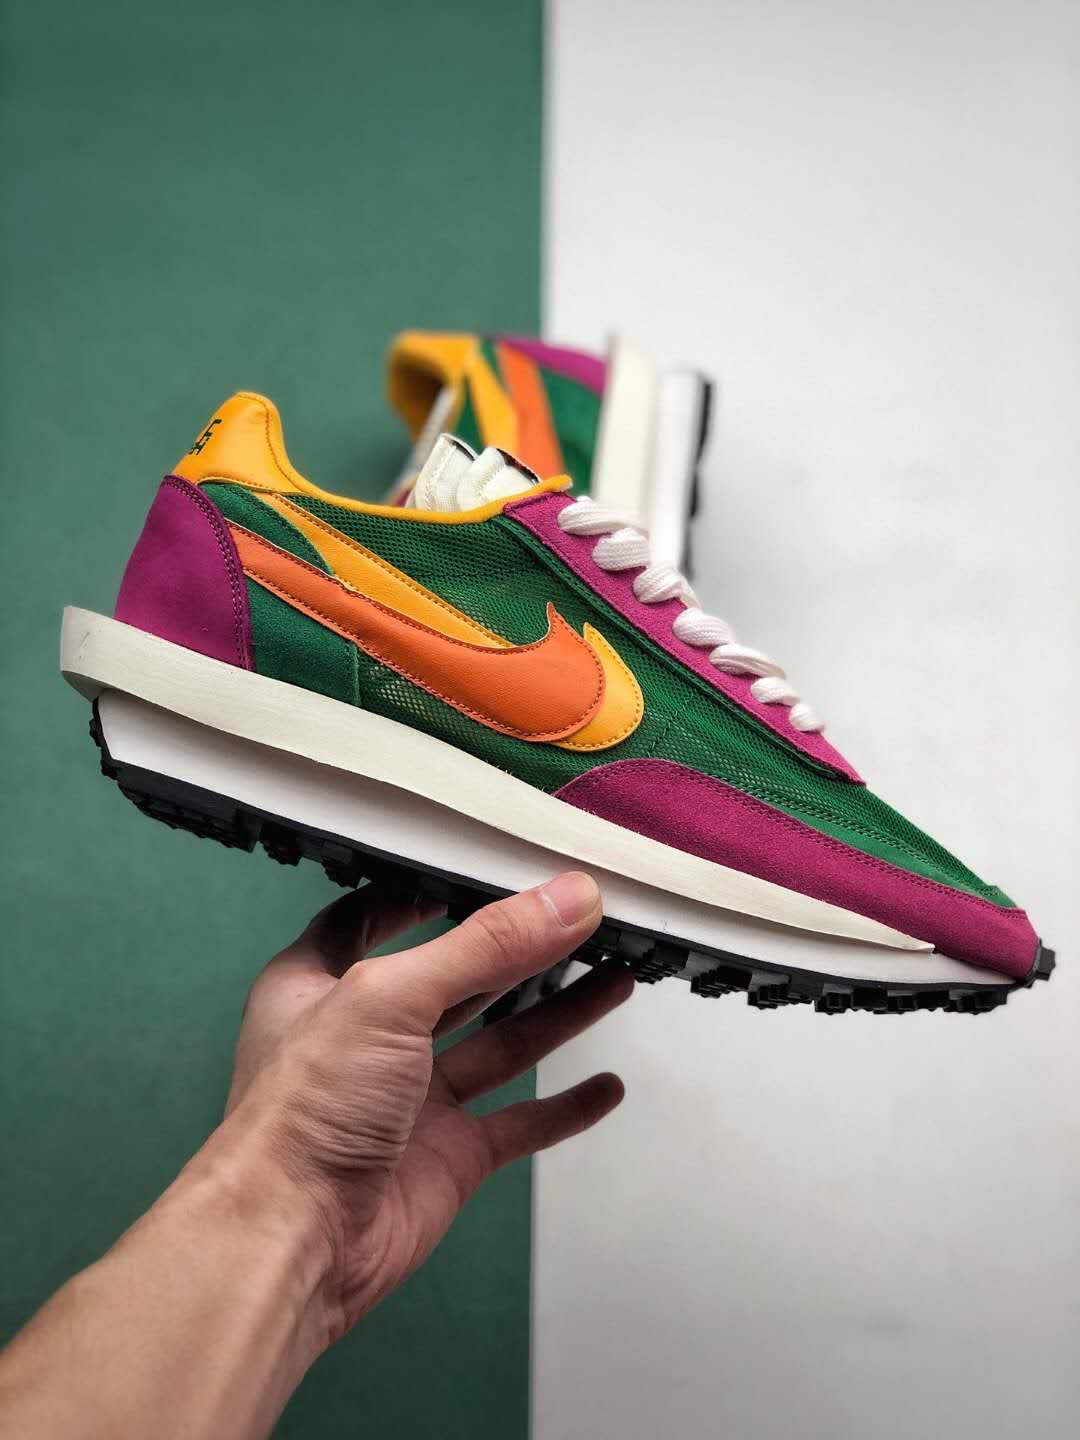 Nike sacai x LDWaffle 'Black' BV0073-001 - Shop Now for Exclusive Release!